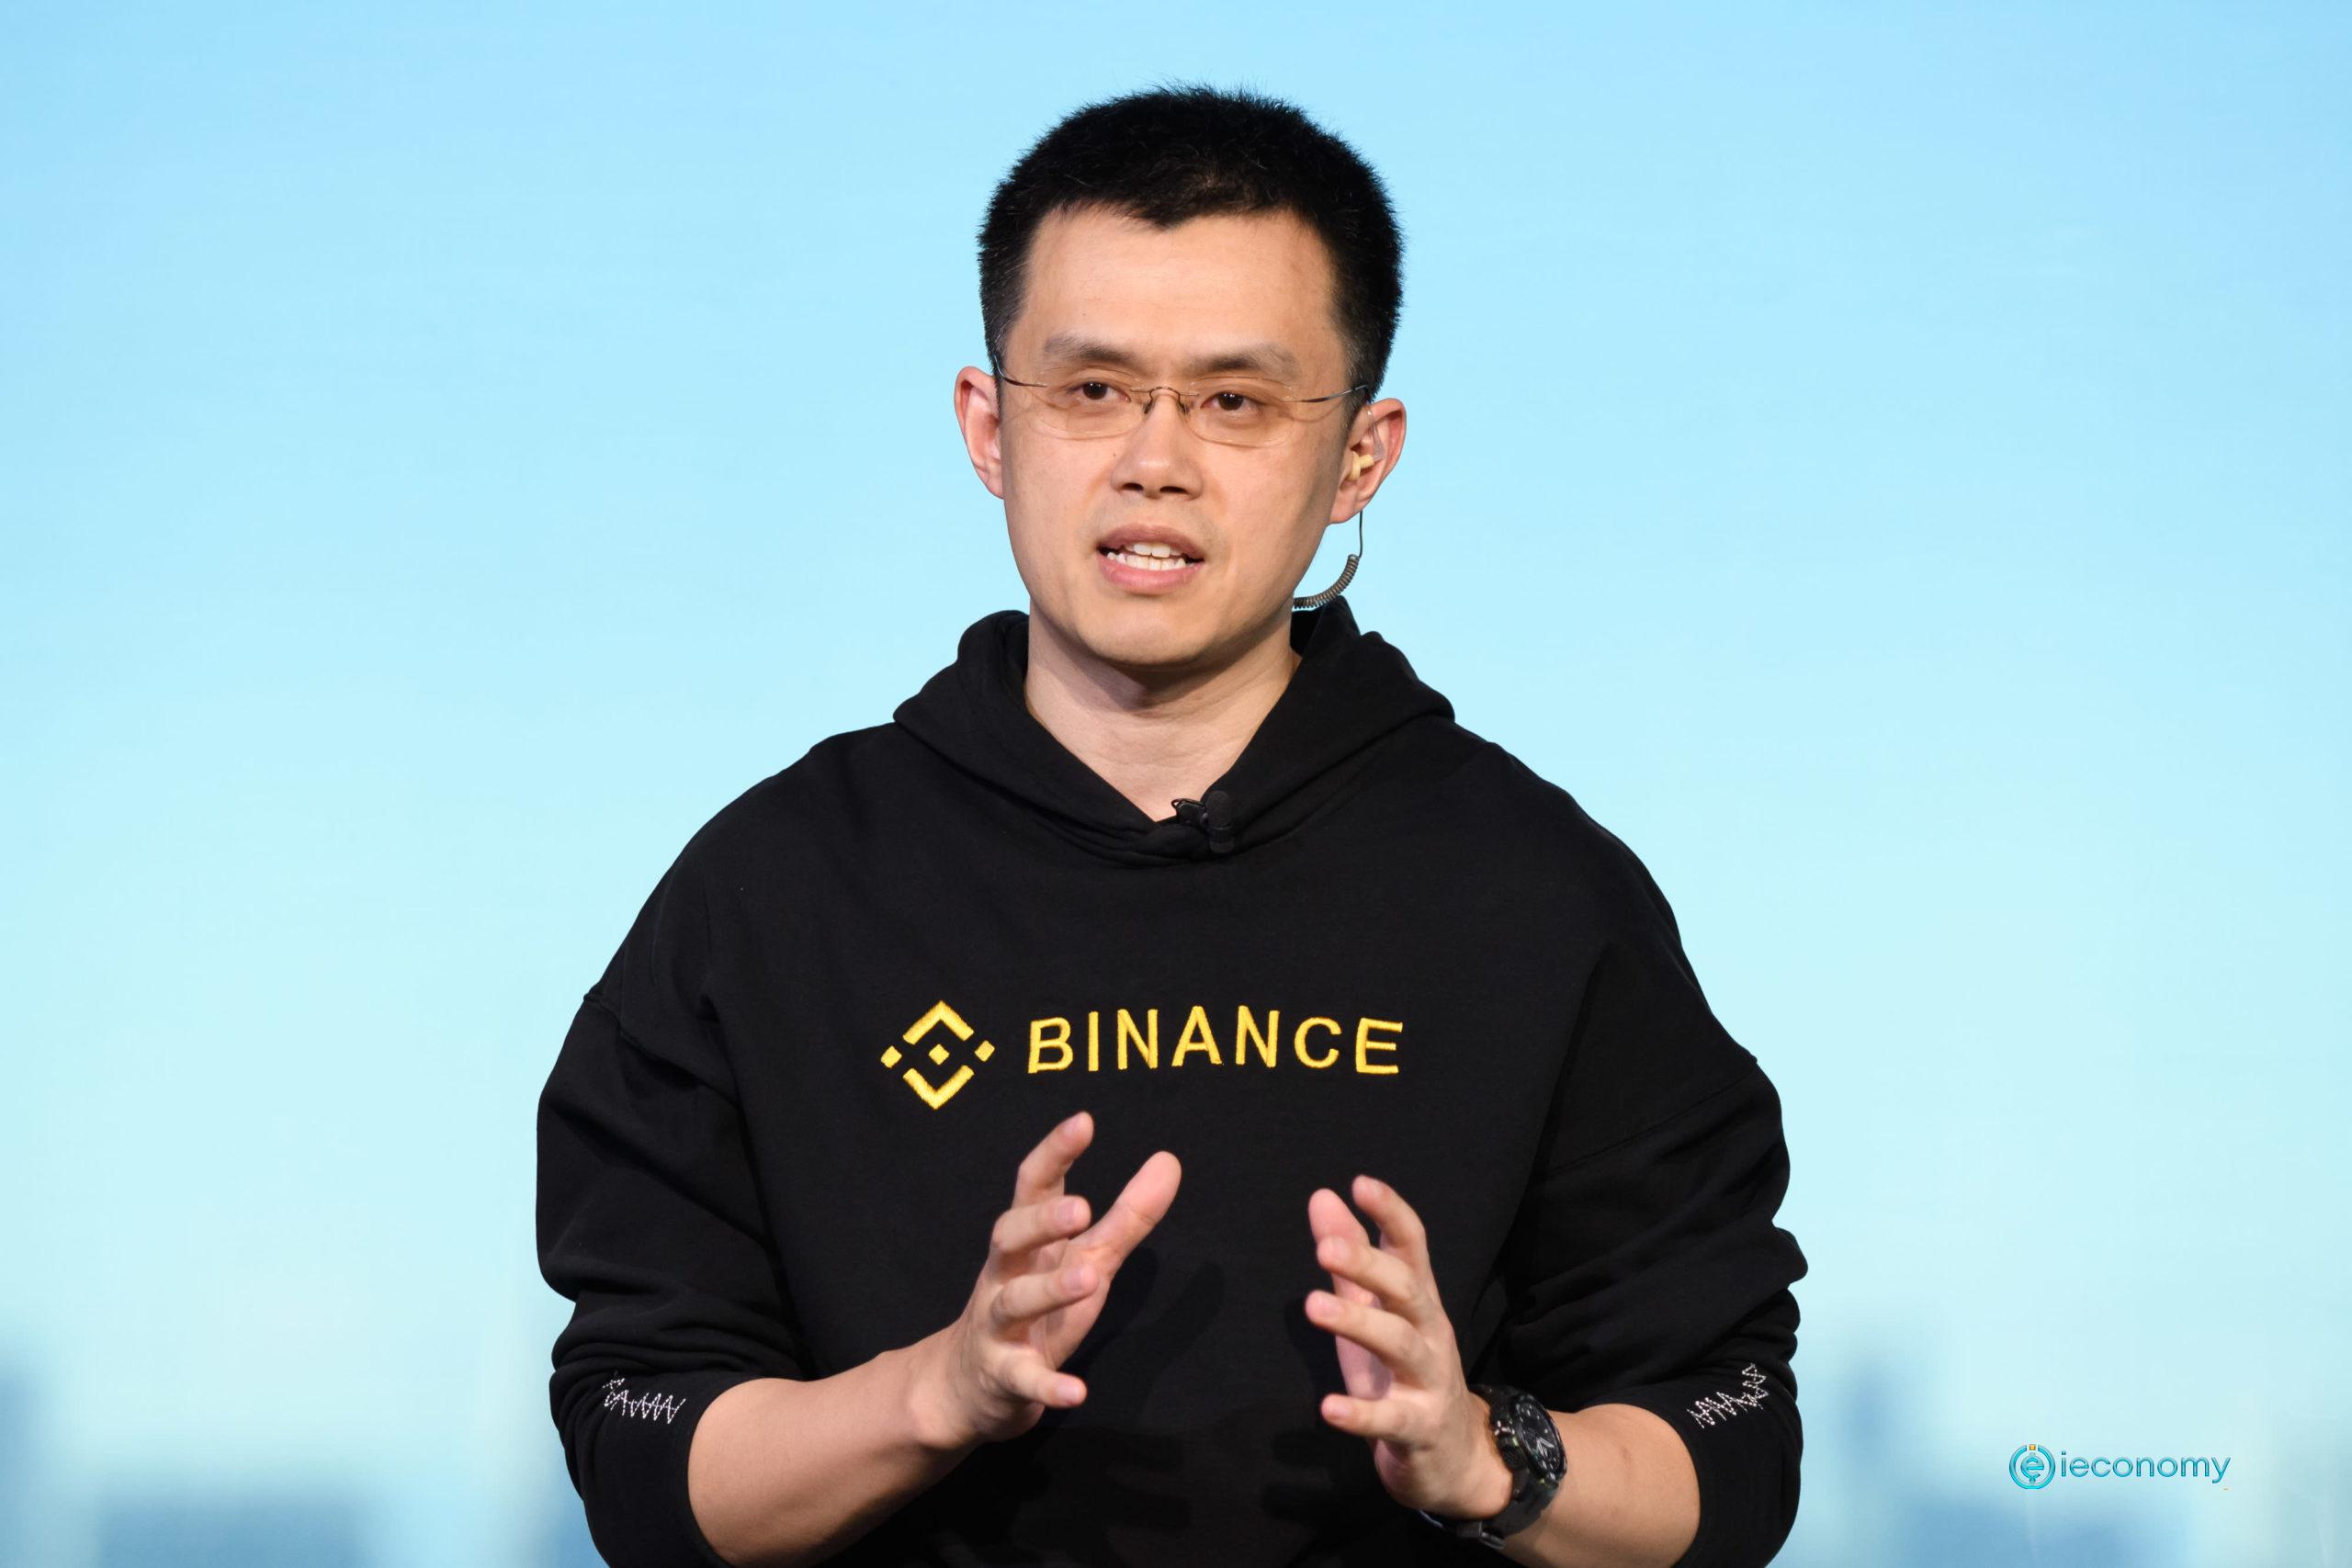 Binance CEO Reacted To The Decline In Cryptocurrencies